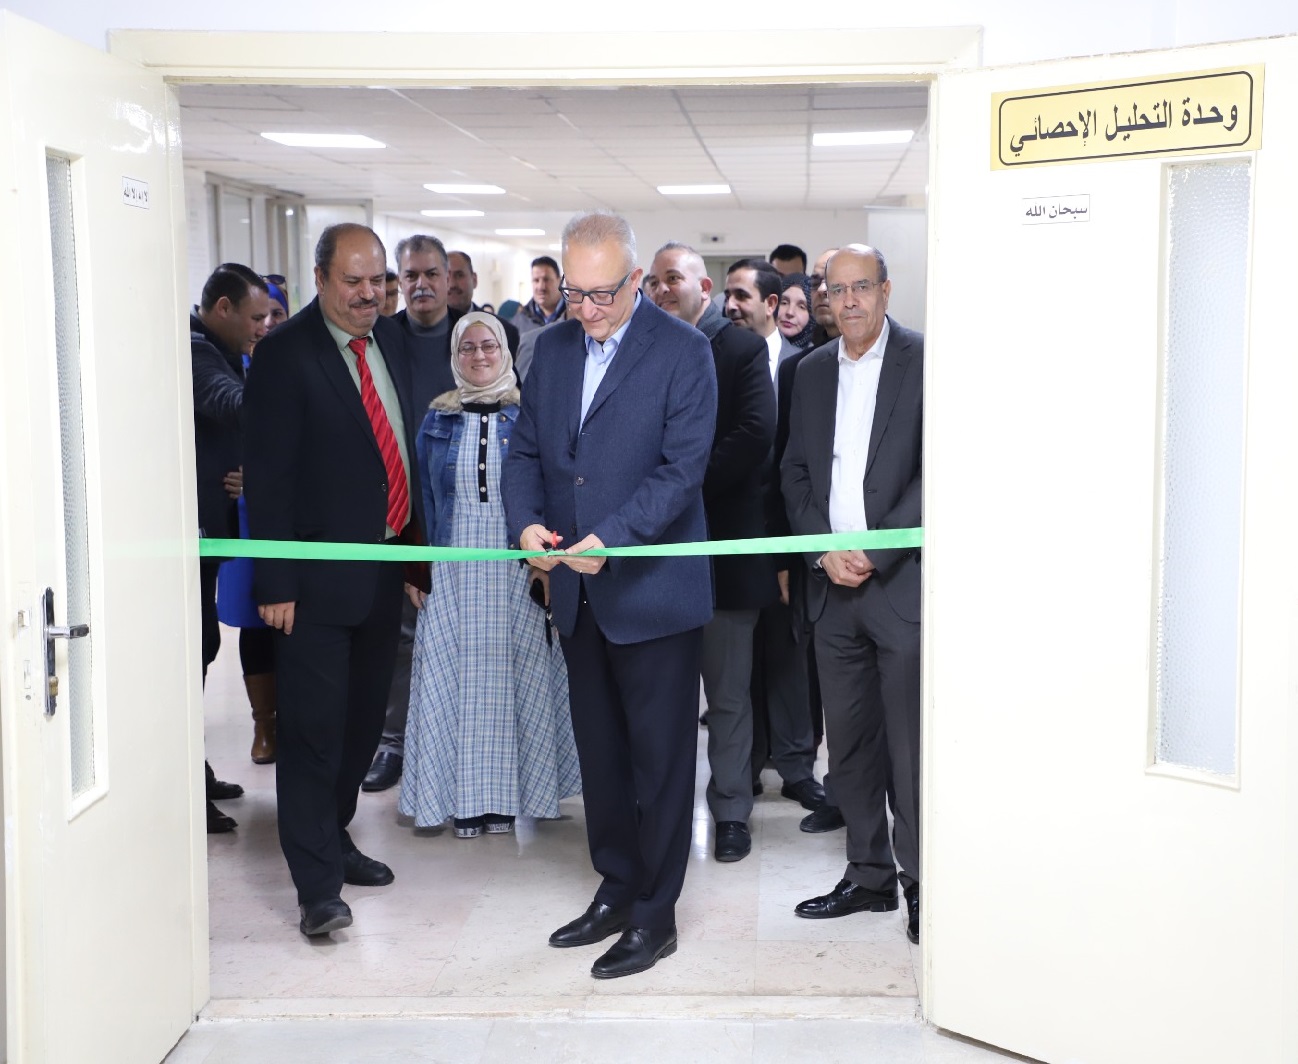 Massad Inaugurates the Statistical Analysis Unit in the Faculty of Science